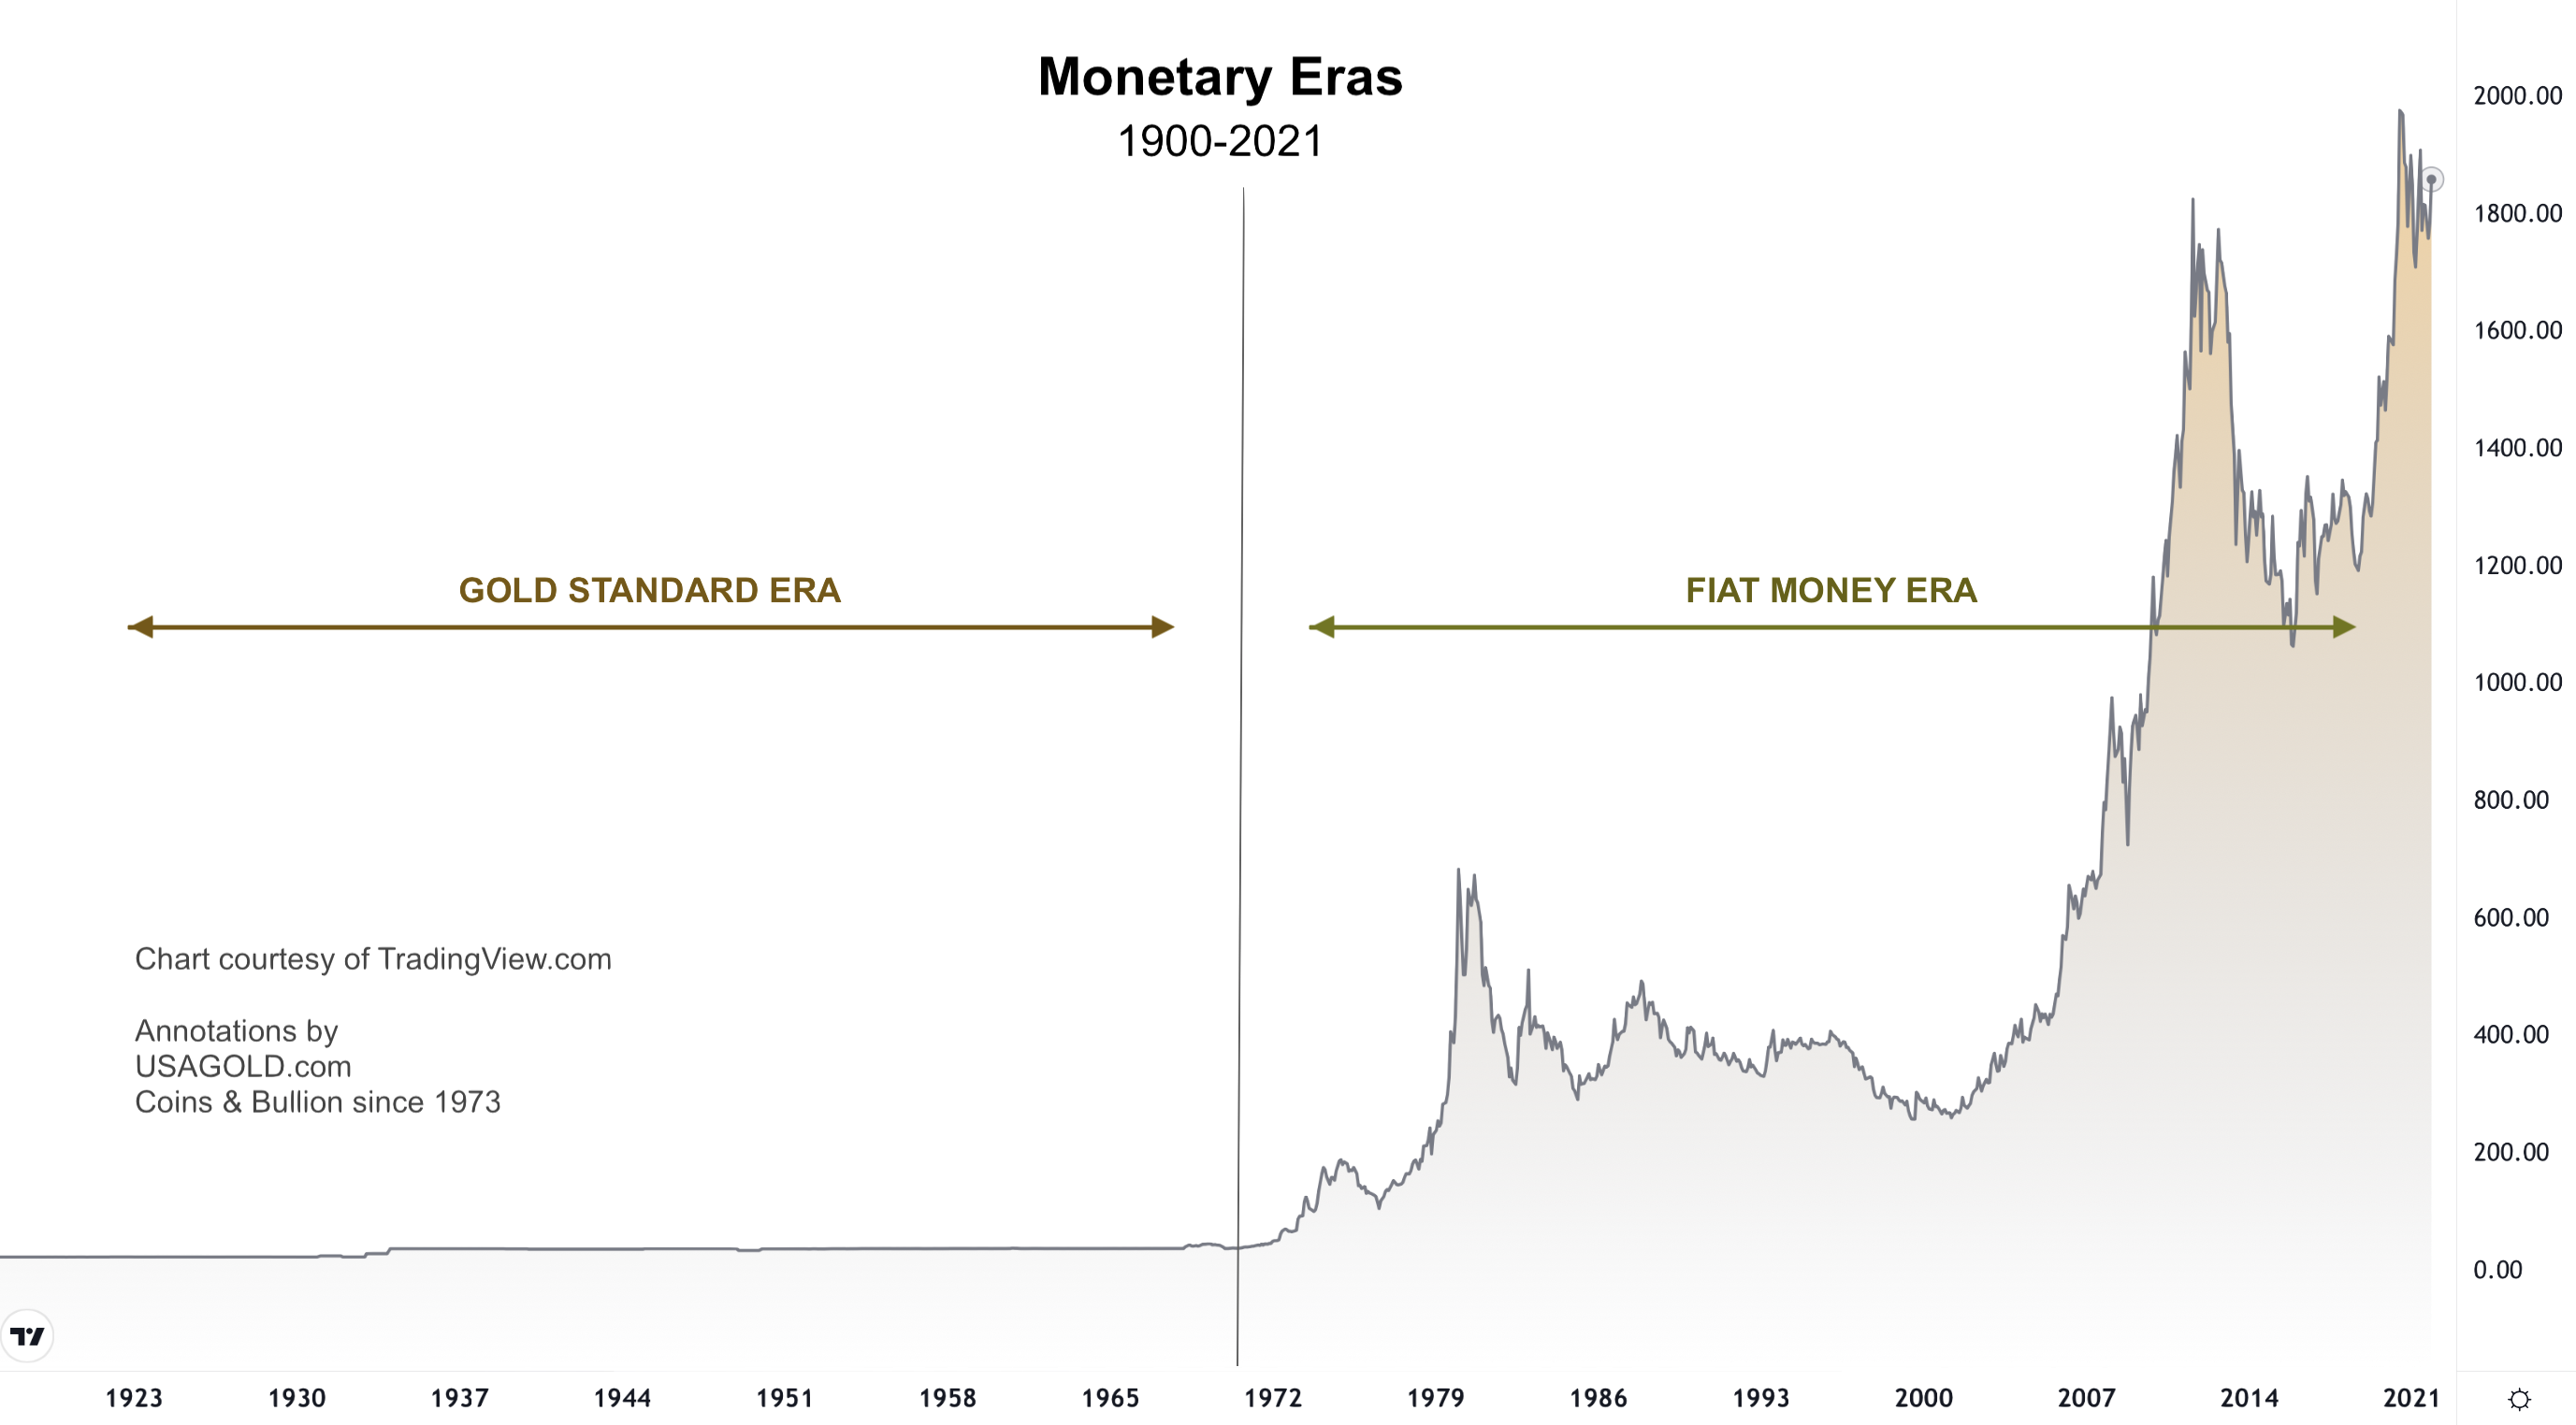 line chart showing the monetary eras - gold and fiat money